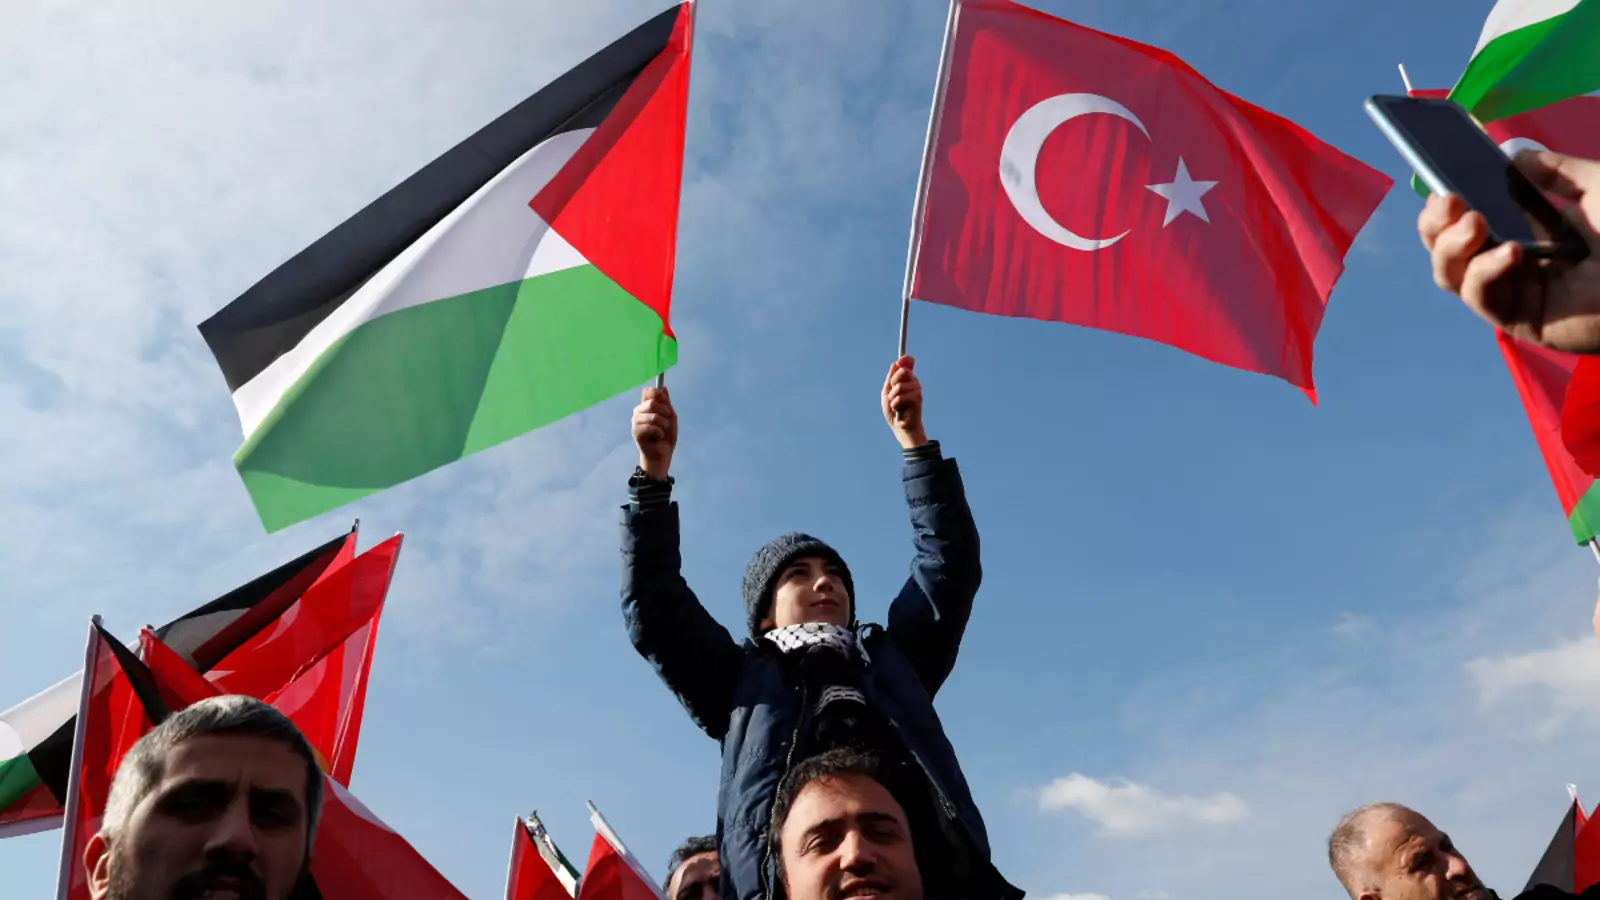 Pro-Palestinian demonstrators in Istanbul protest against U.S. President Donald J. Trump’s proposed Middle East peace plan.